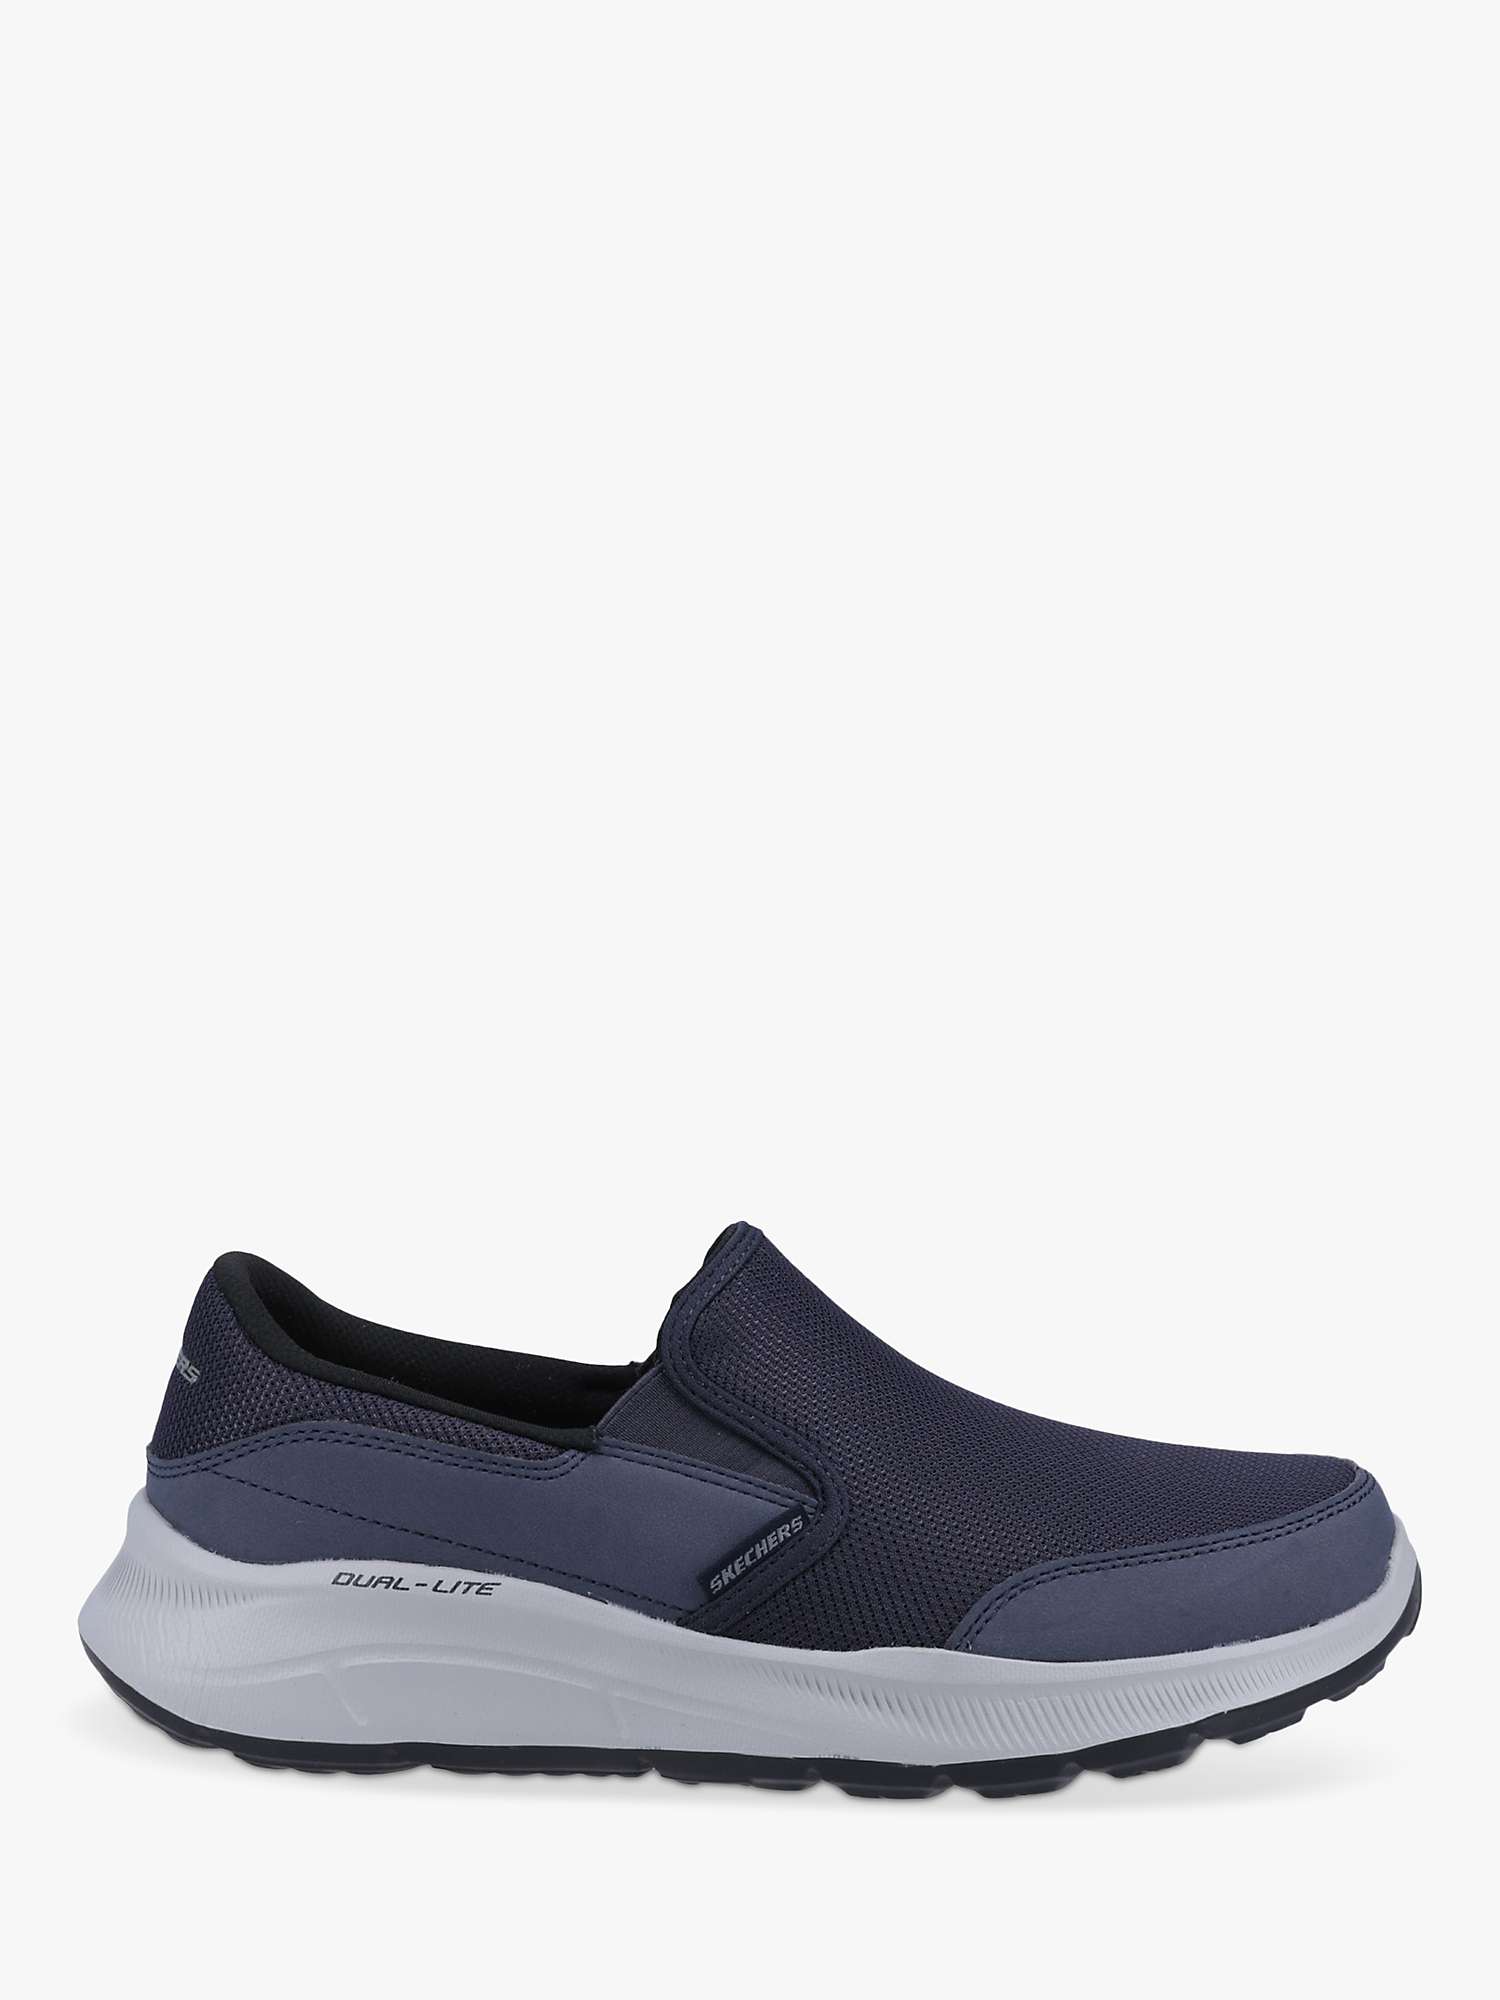 Buy Skechers Equalizer 5.0 Persistable Slip On Trainers Online at johnlewis.com